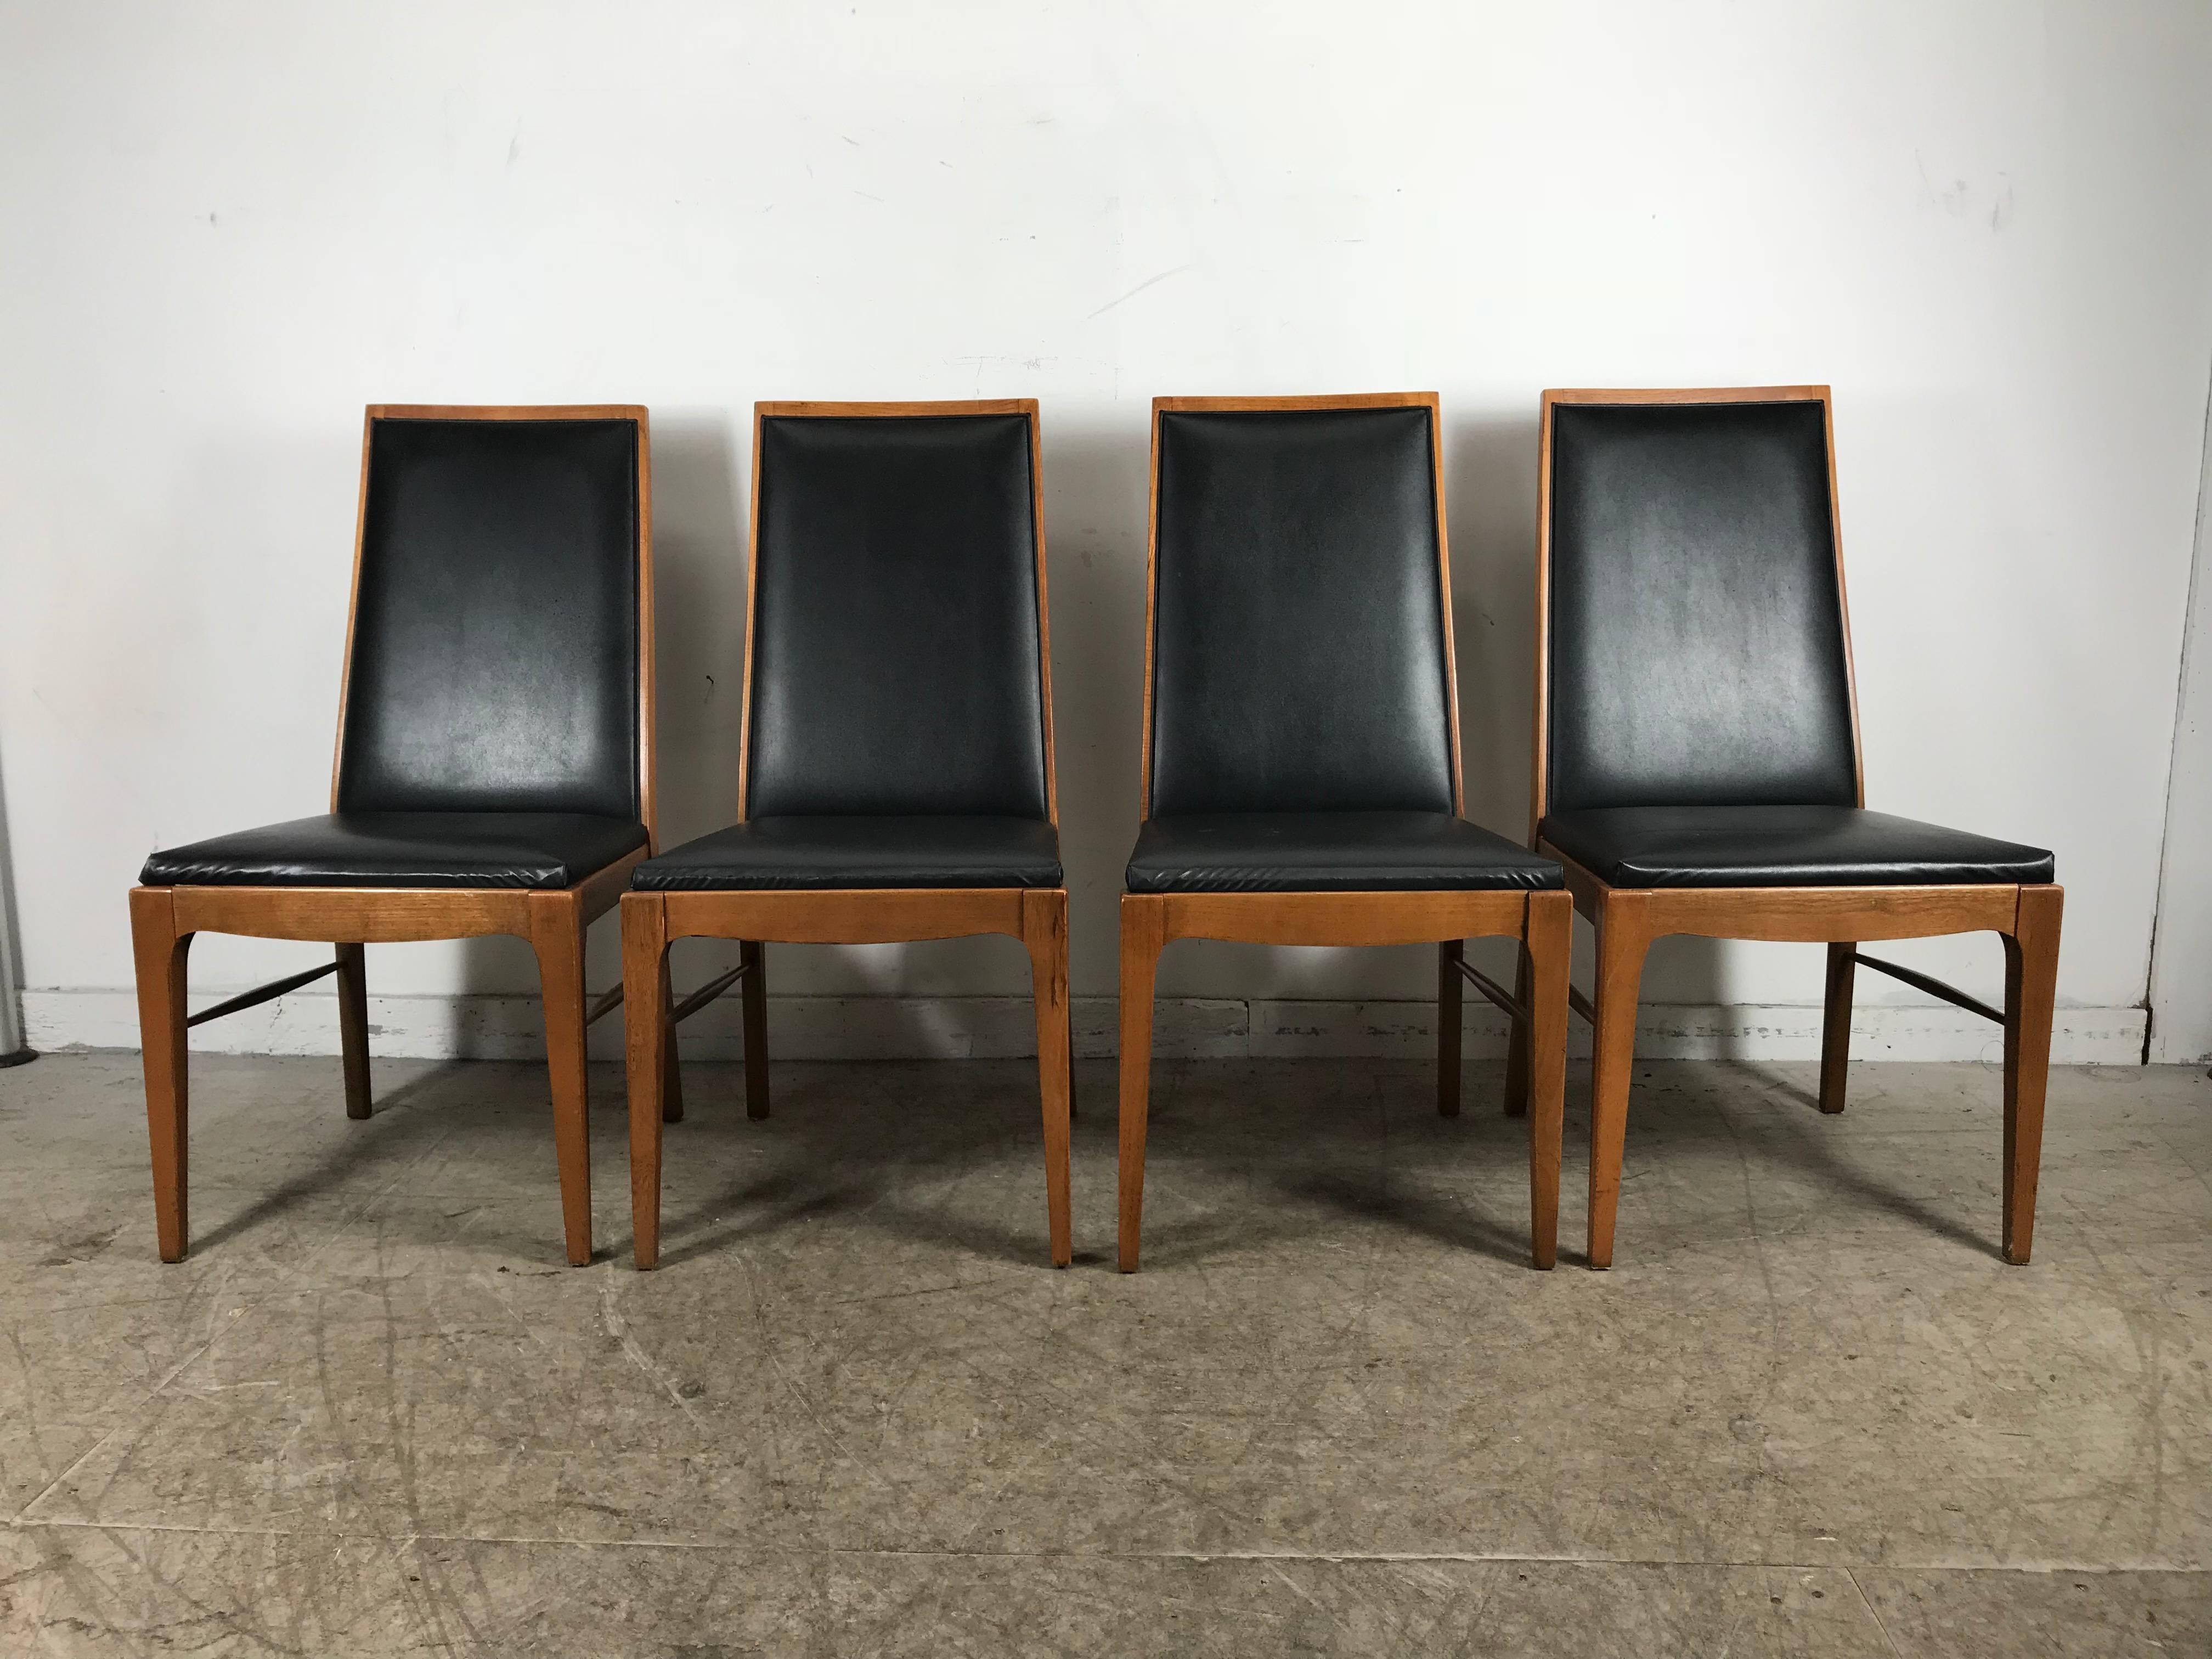 Set of four modernist walnut dining chairs by Lane Classic, simple elegant styling, solid walnut frames, Sturdy, tight joints, extremely comfortable. Hand delivery avail to New York City or anywhere en route from Buffalo New York.